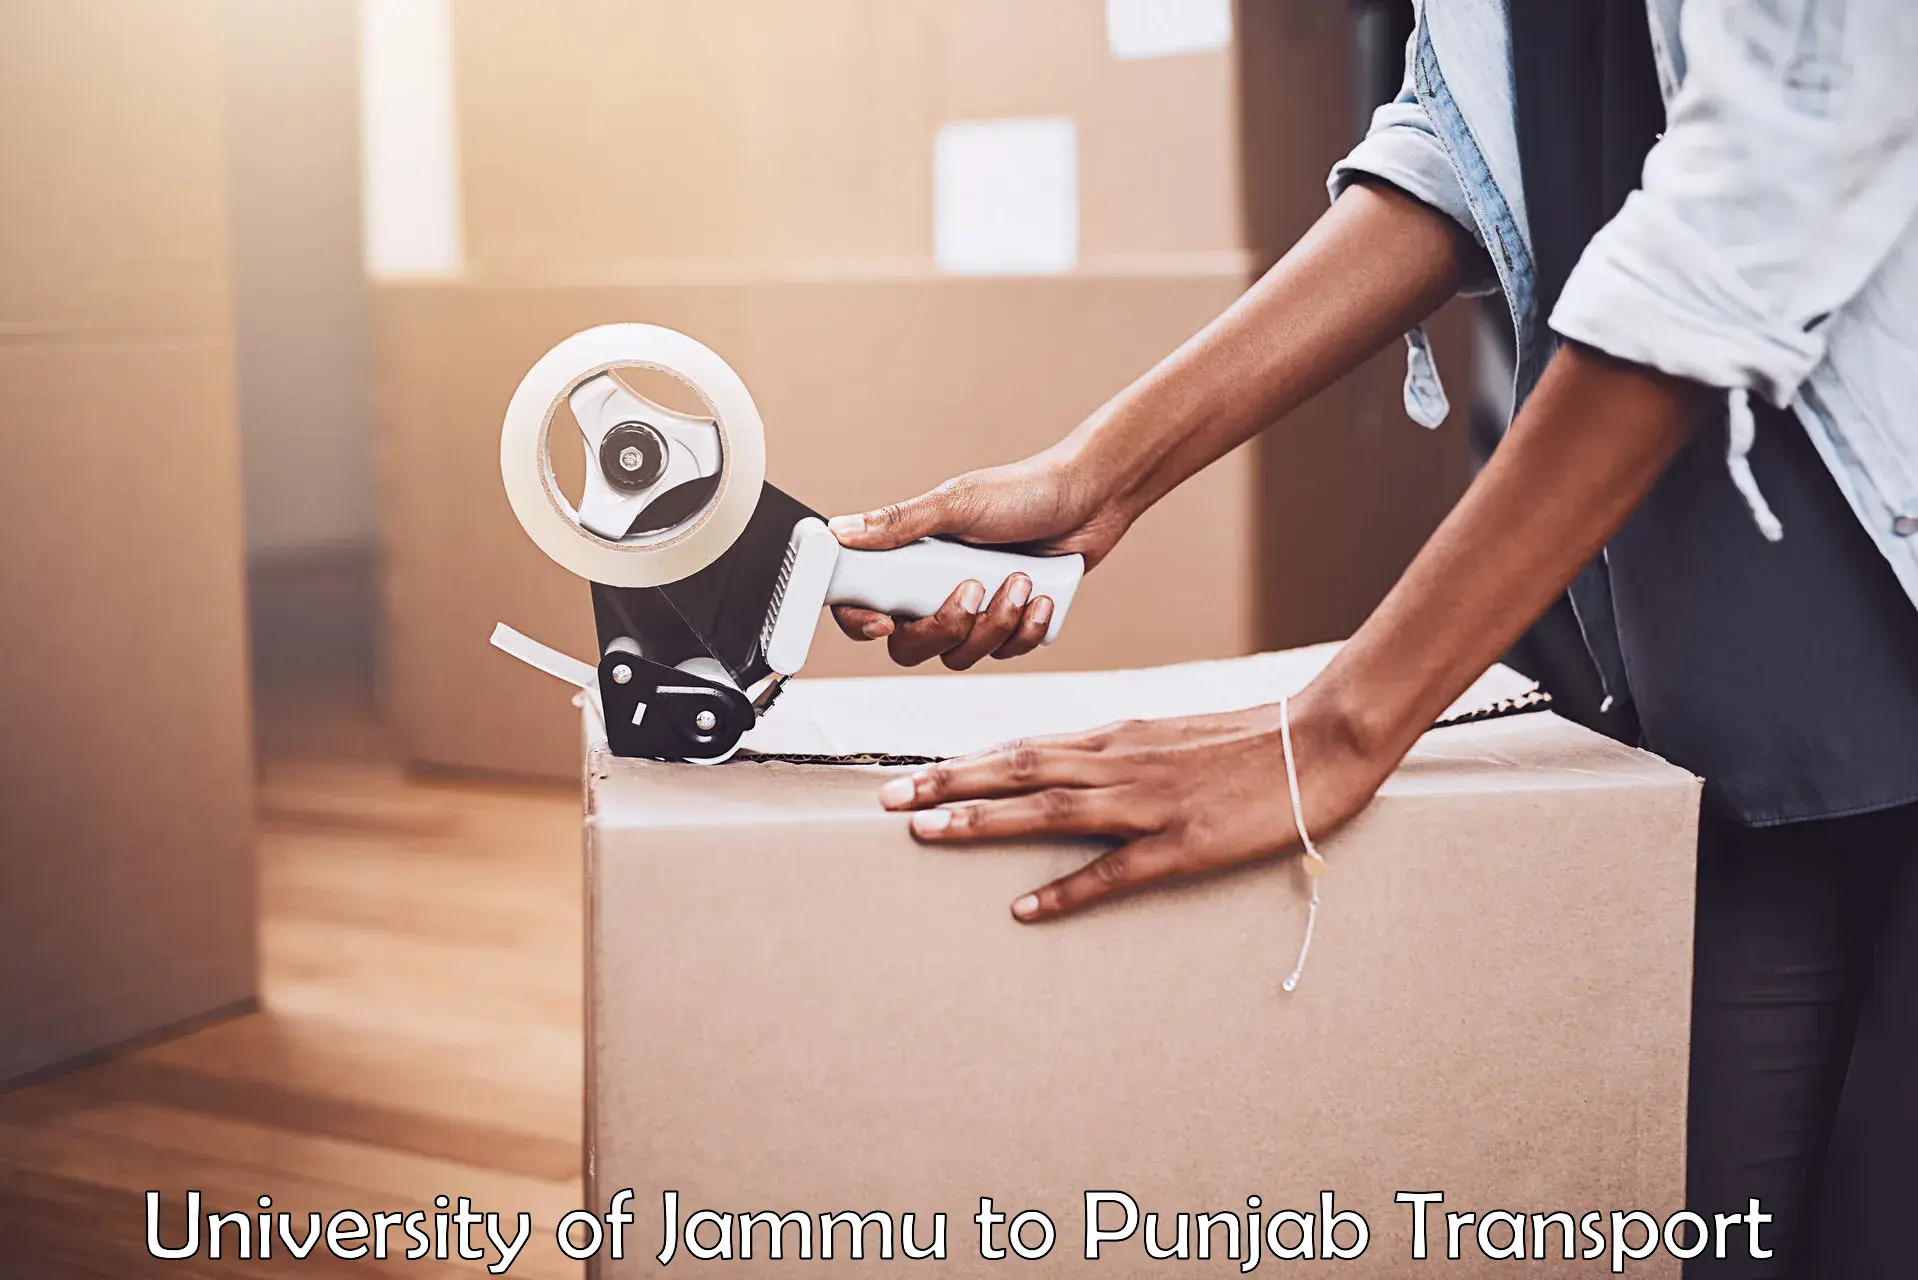 Container transport service University of Jammu to Pathankot